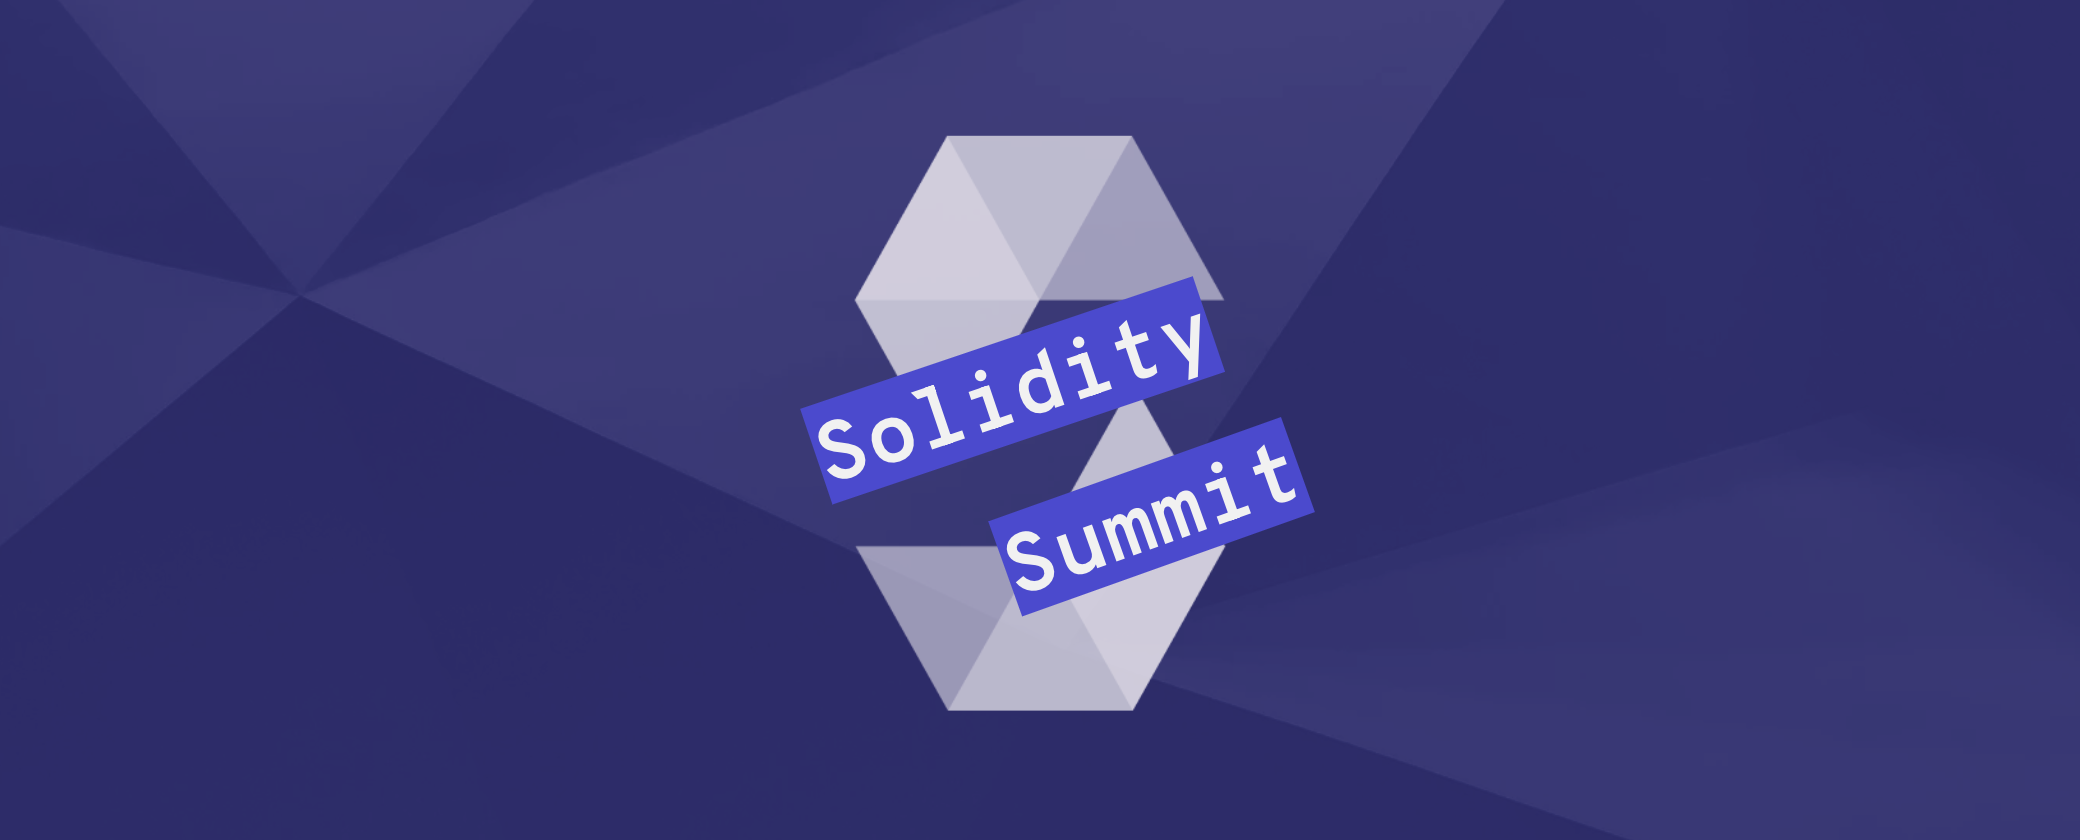 Solidity event image